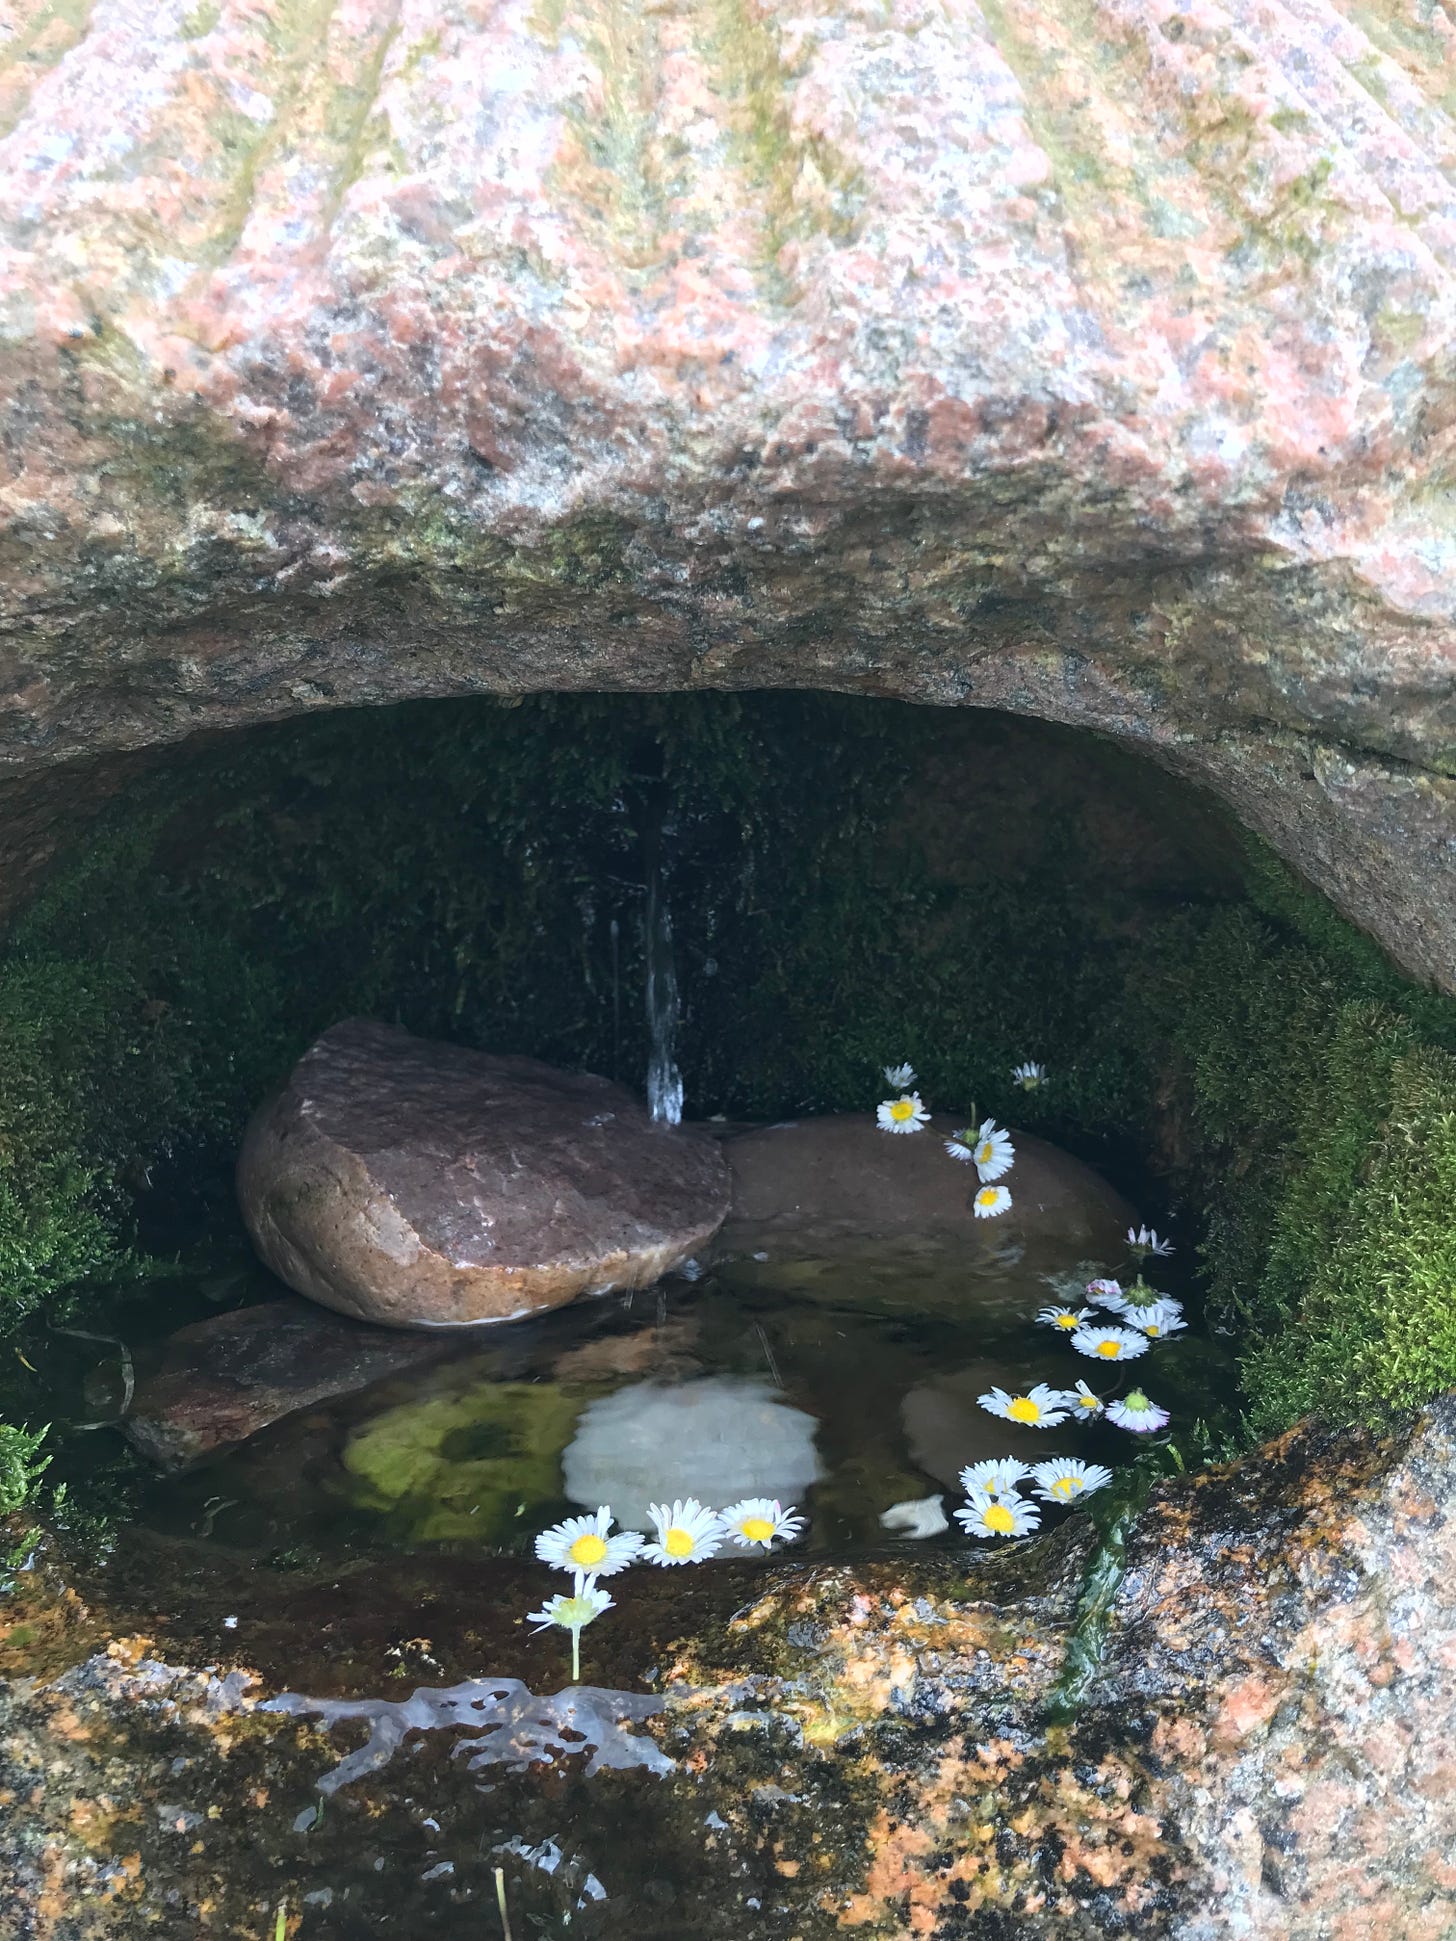 A sandstone well house lined with moss, with a small stream of water pouring down. Flowers float over rocks in the basin as it overflows